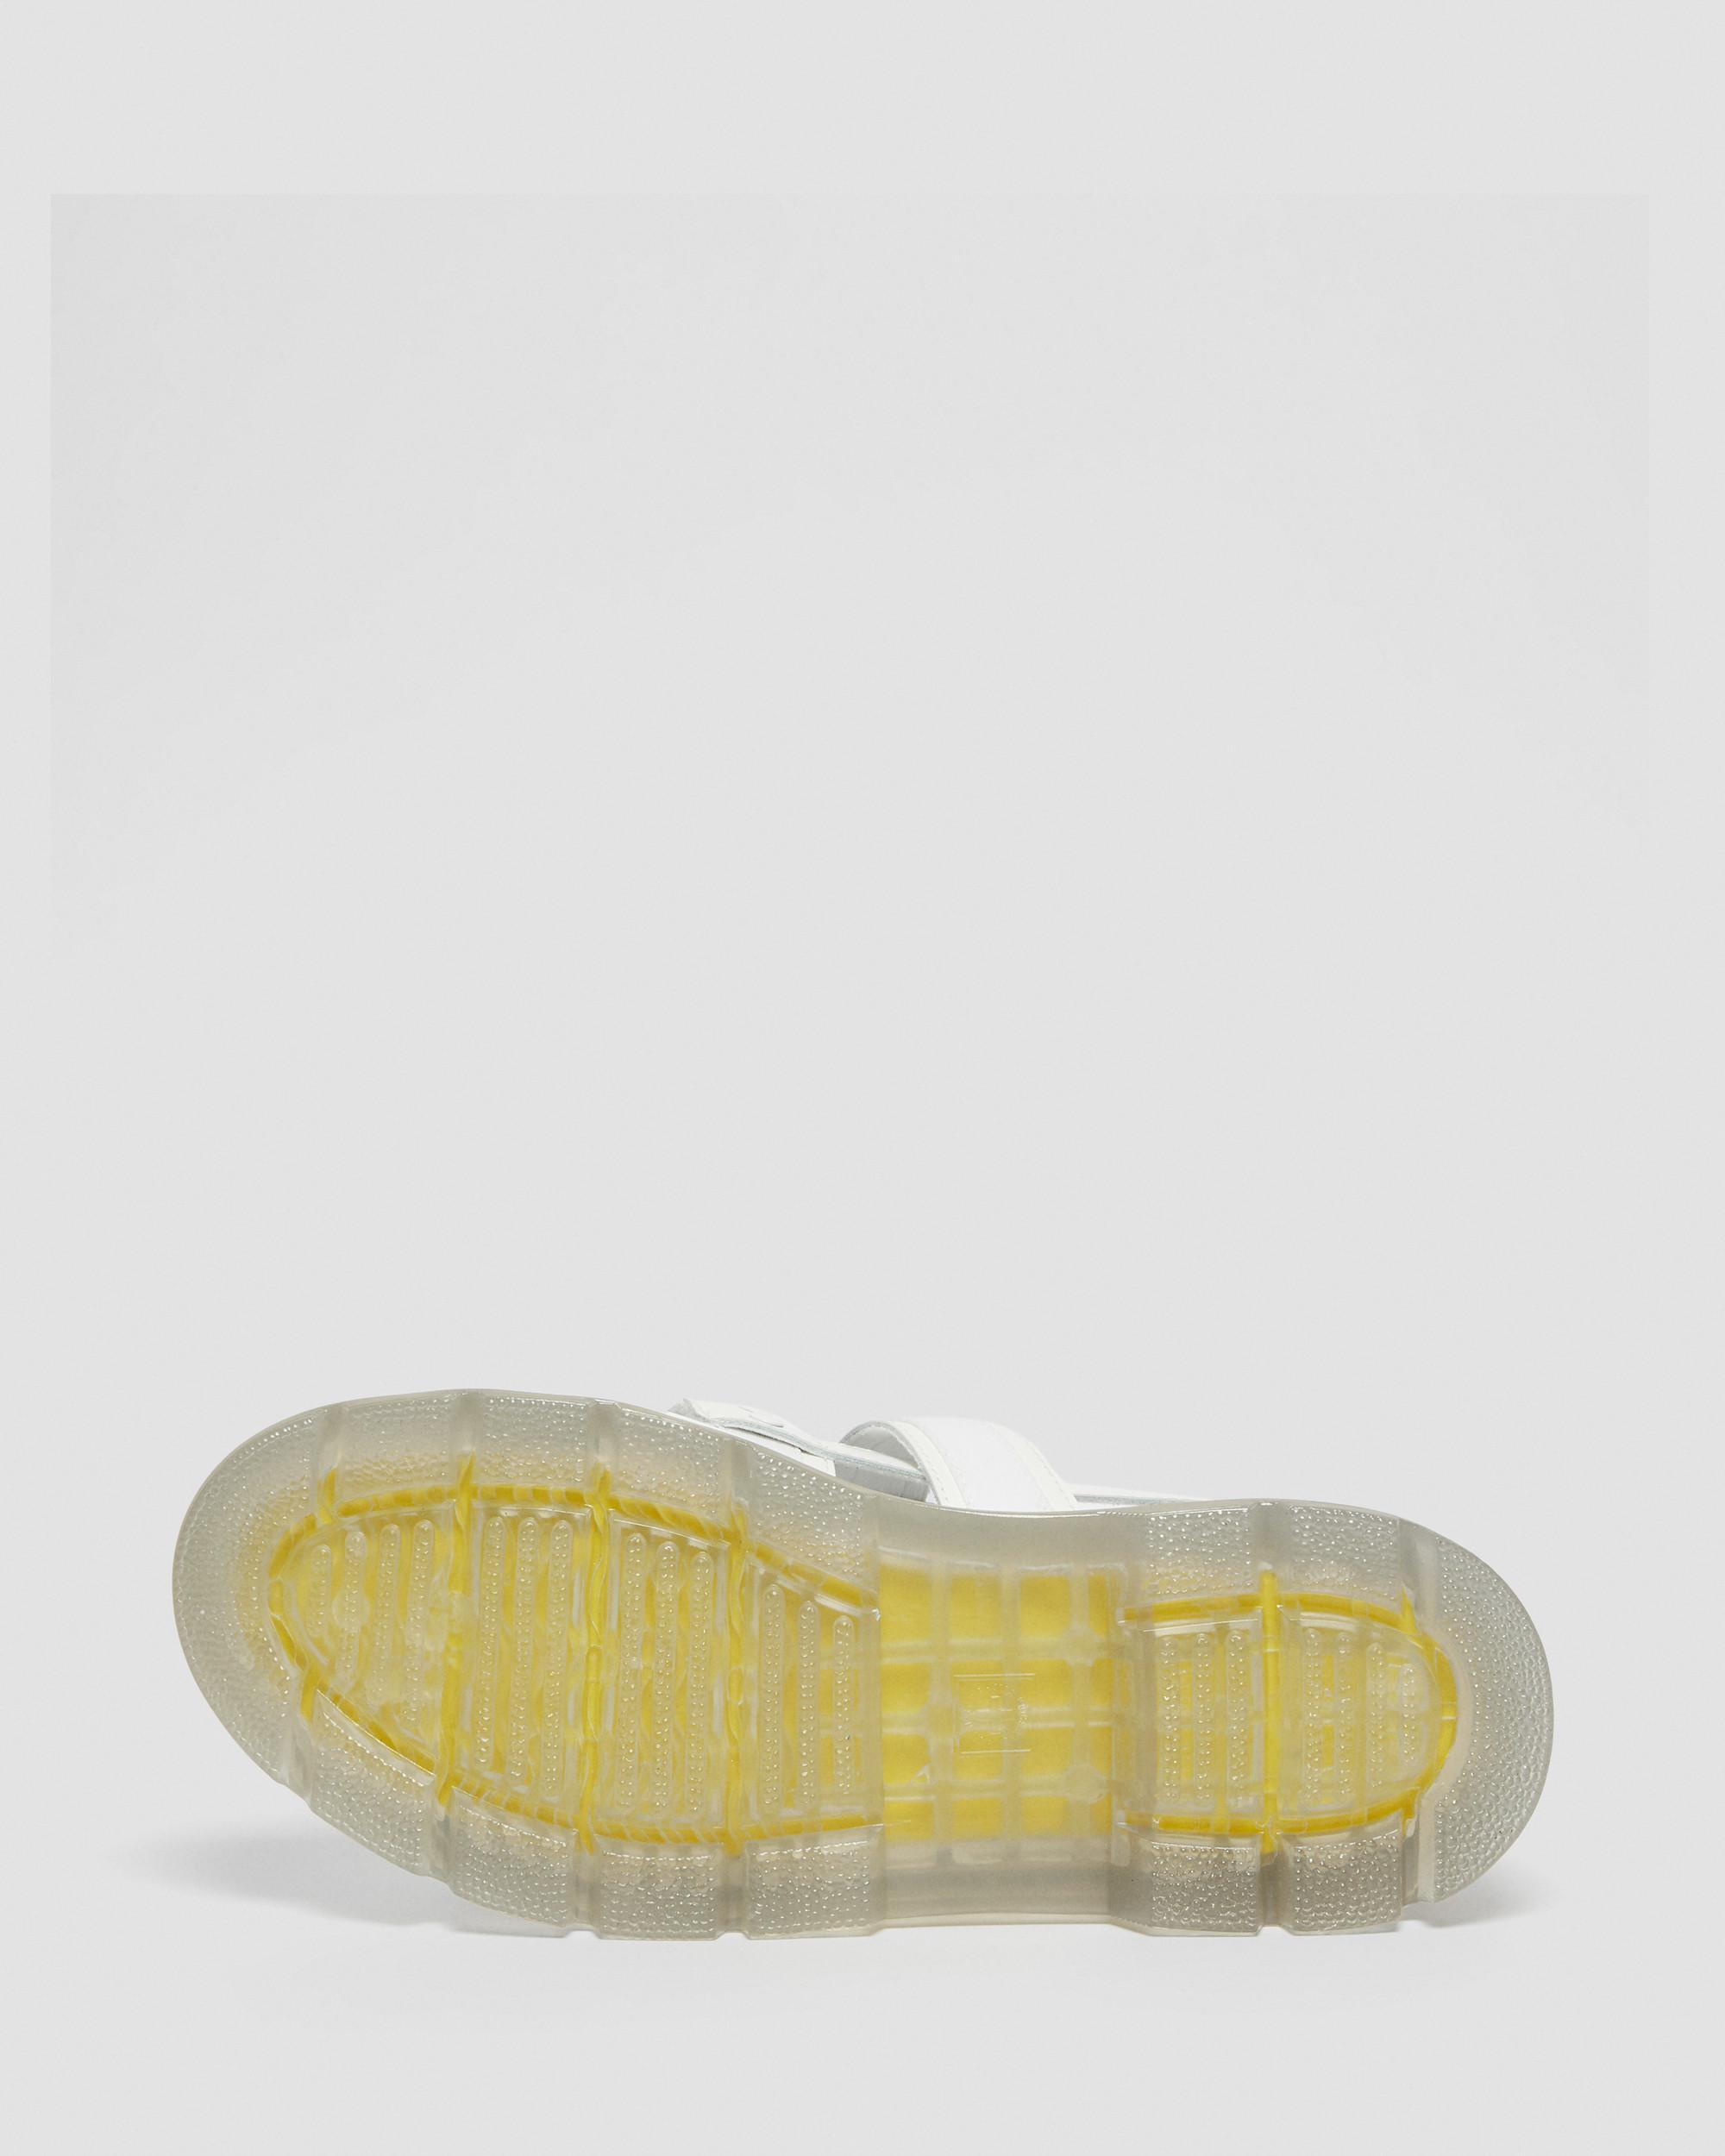 Pearson Iced Webbing Sandals, White | Dr. Martens